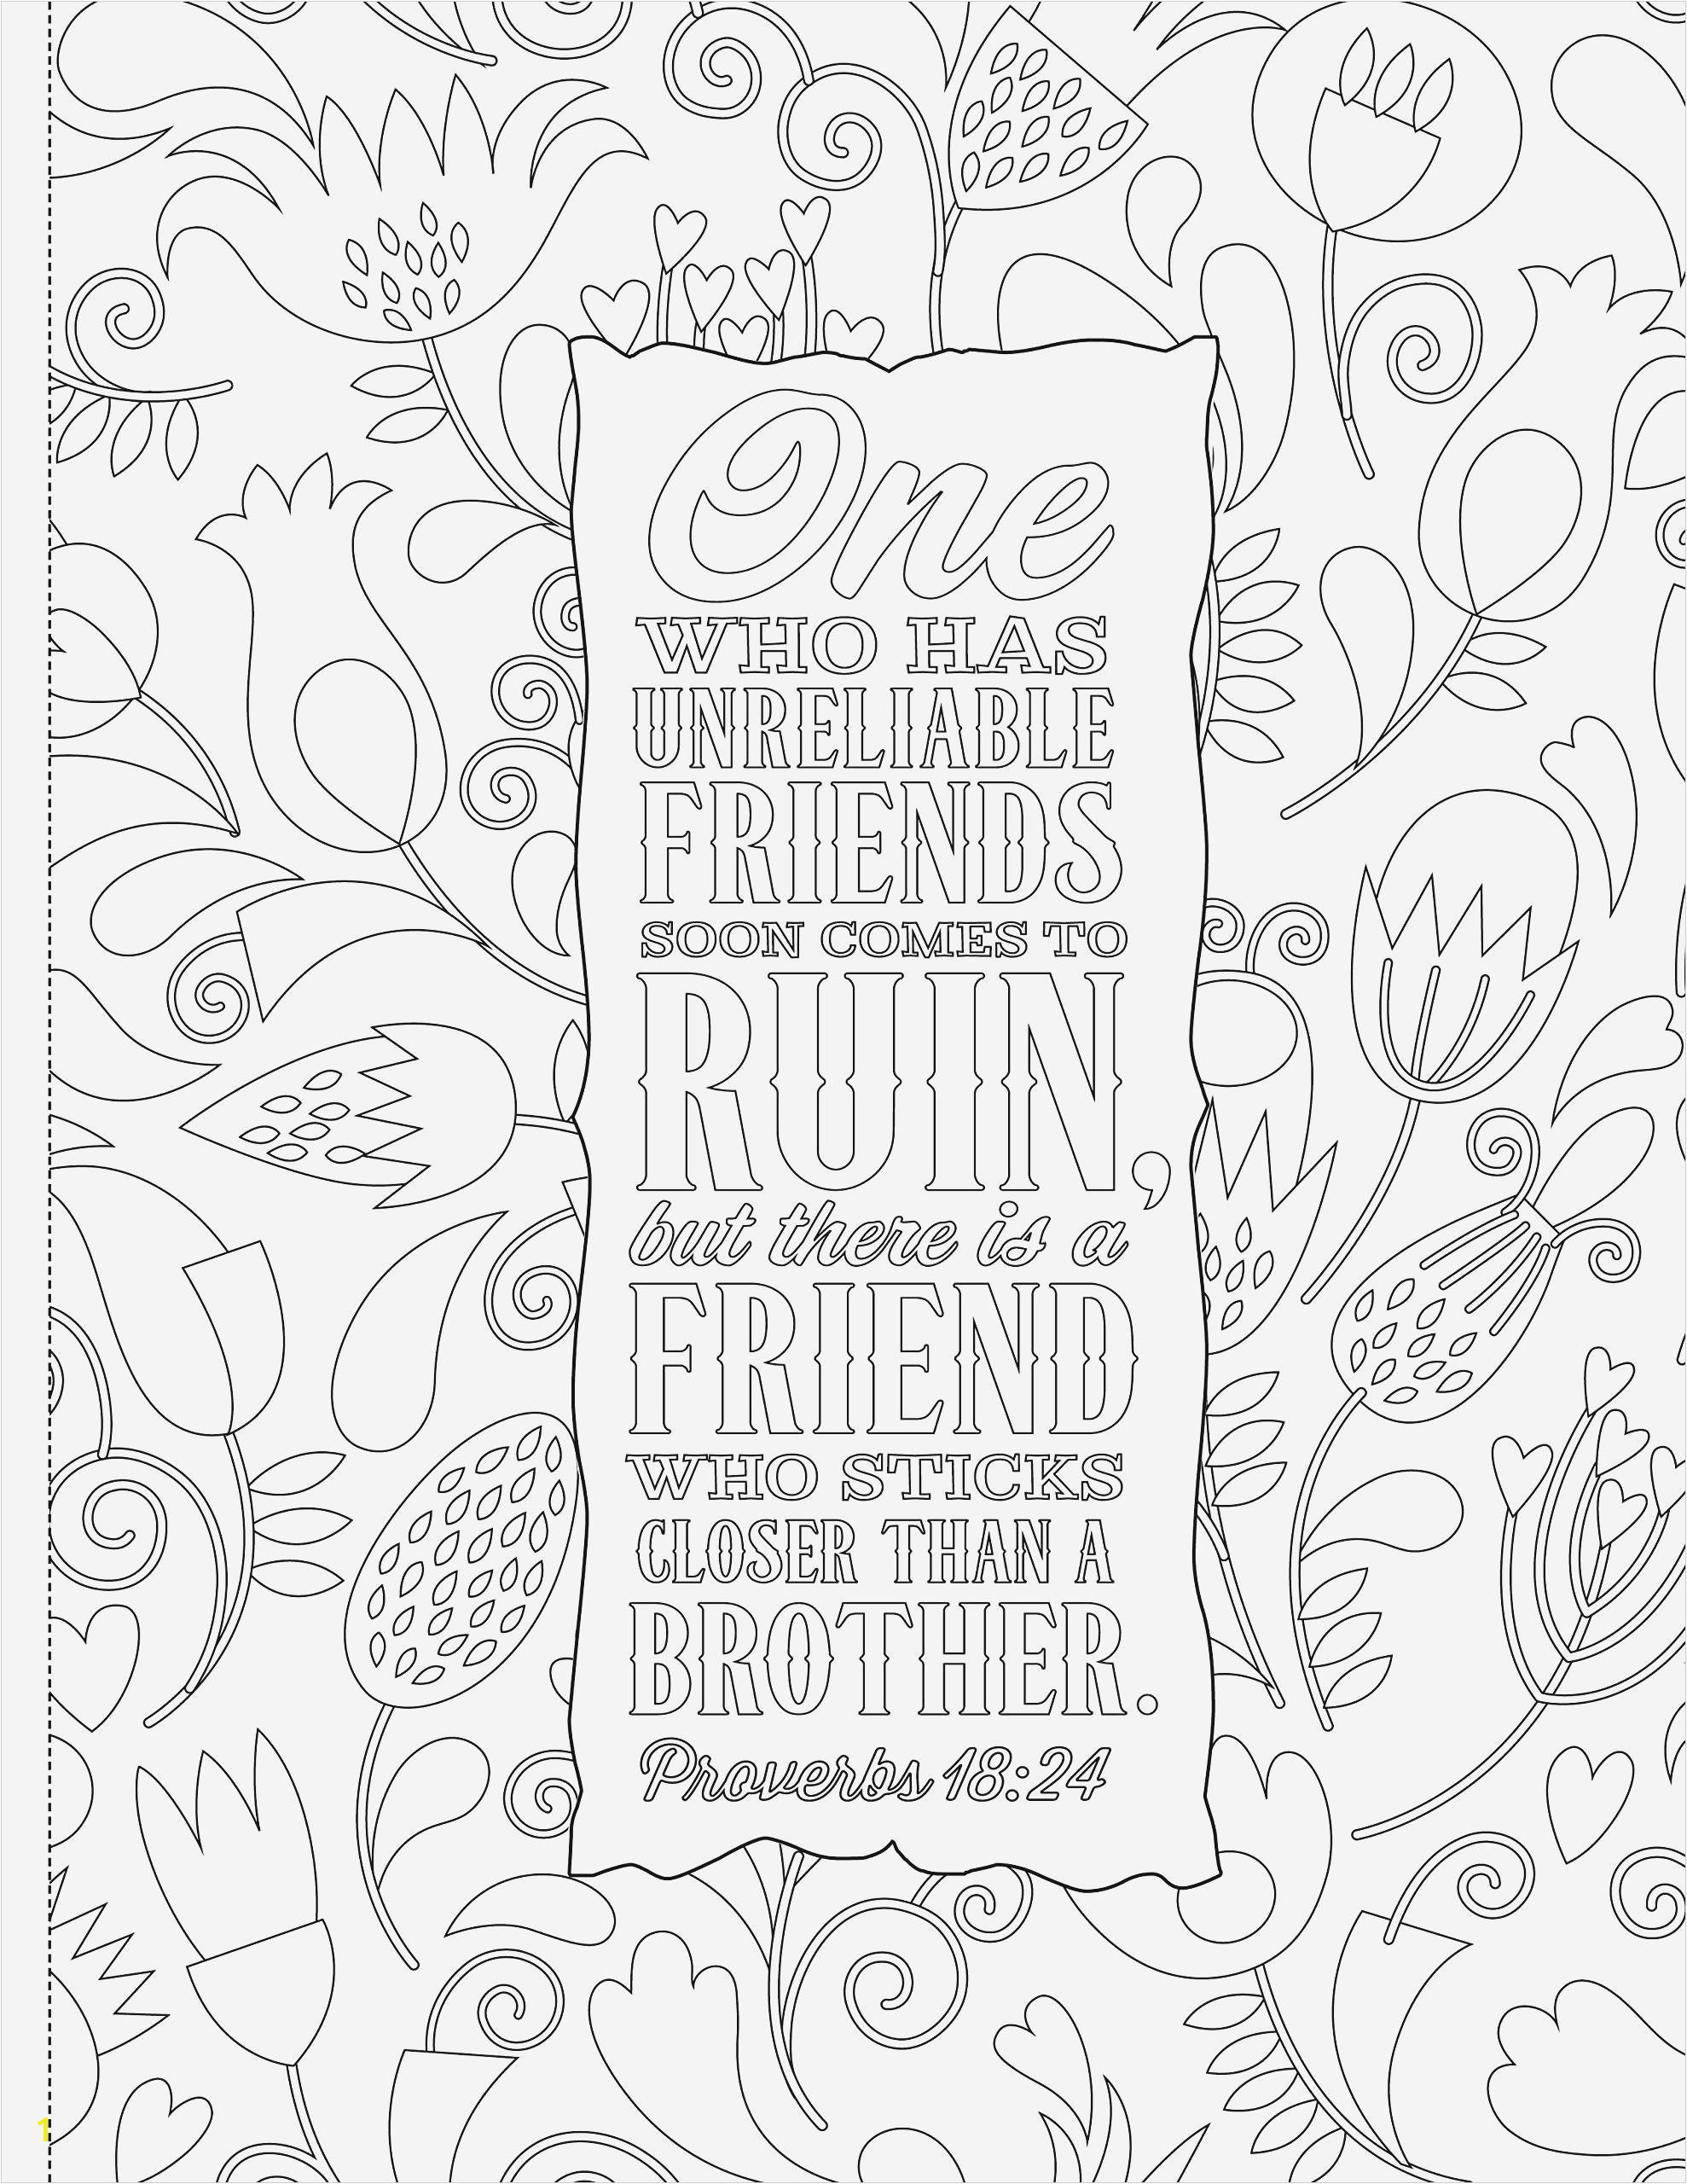 Be Ye Kind One to Another Coloring Page â· Free Collection 12 Beautiful Kids Bible Coloring Pages Ideas